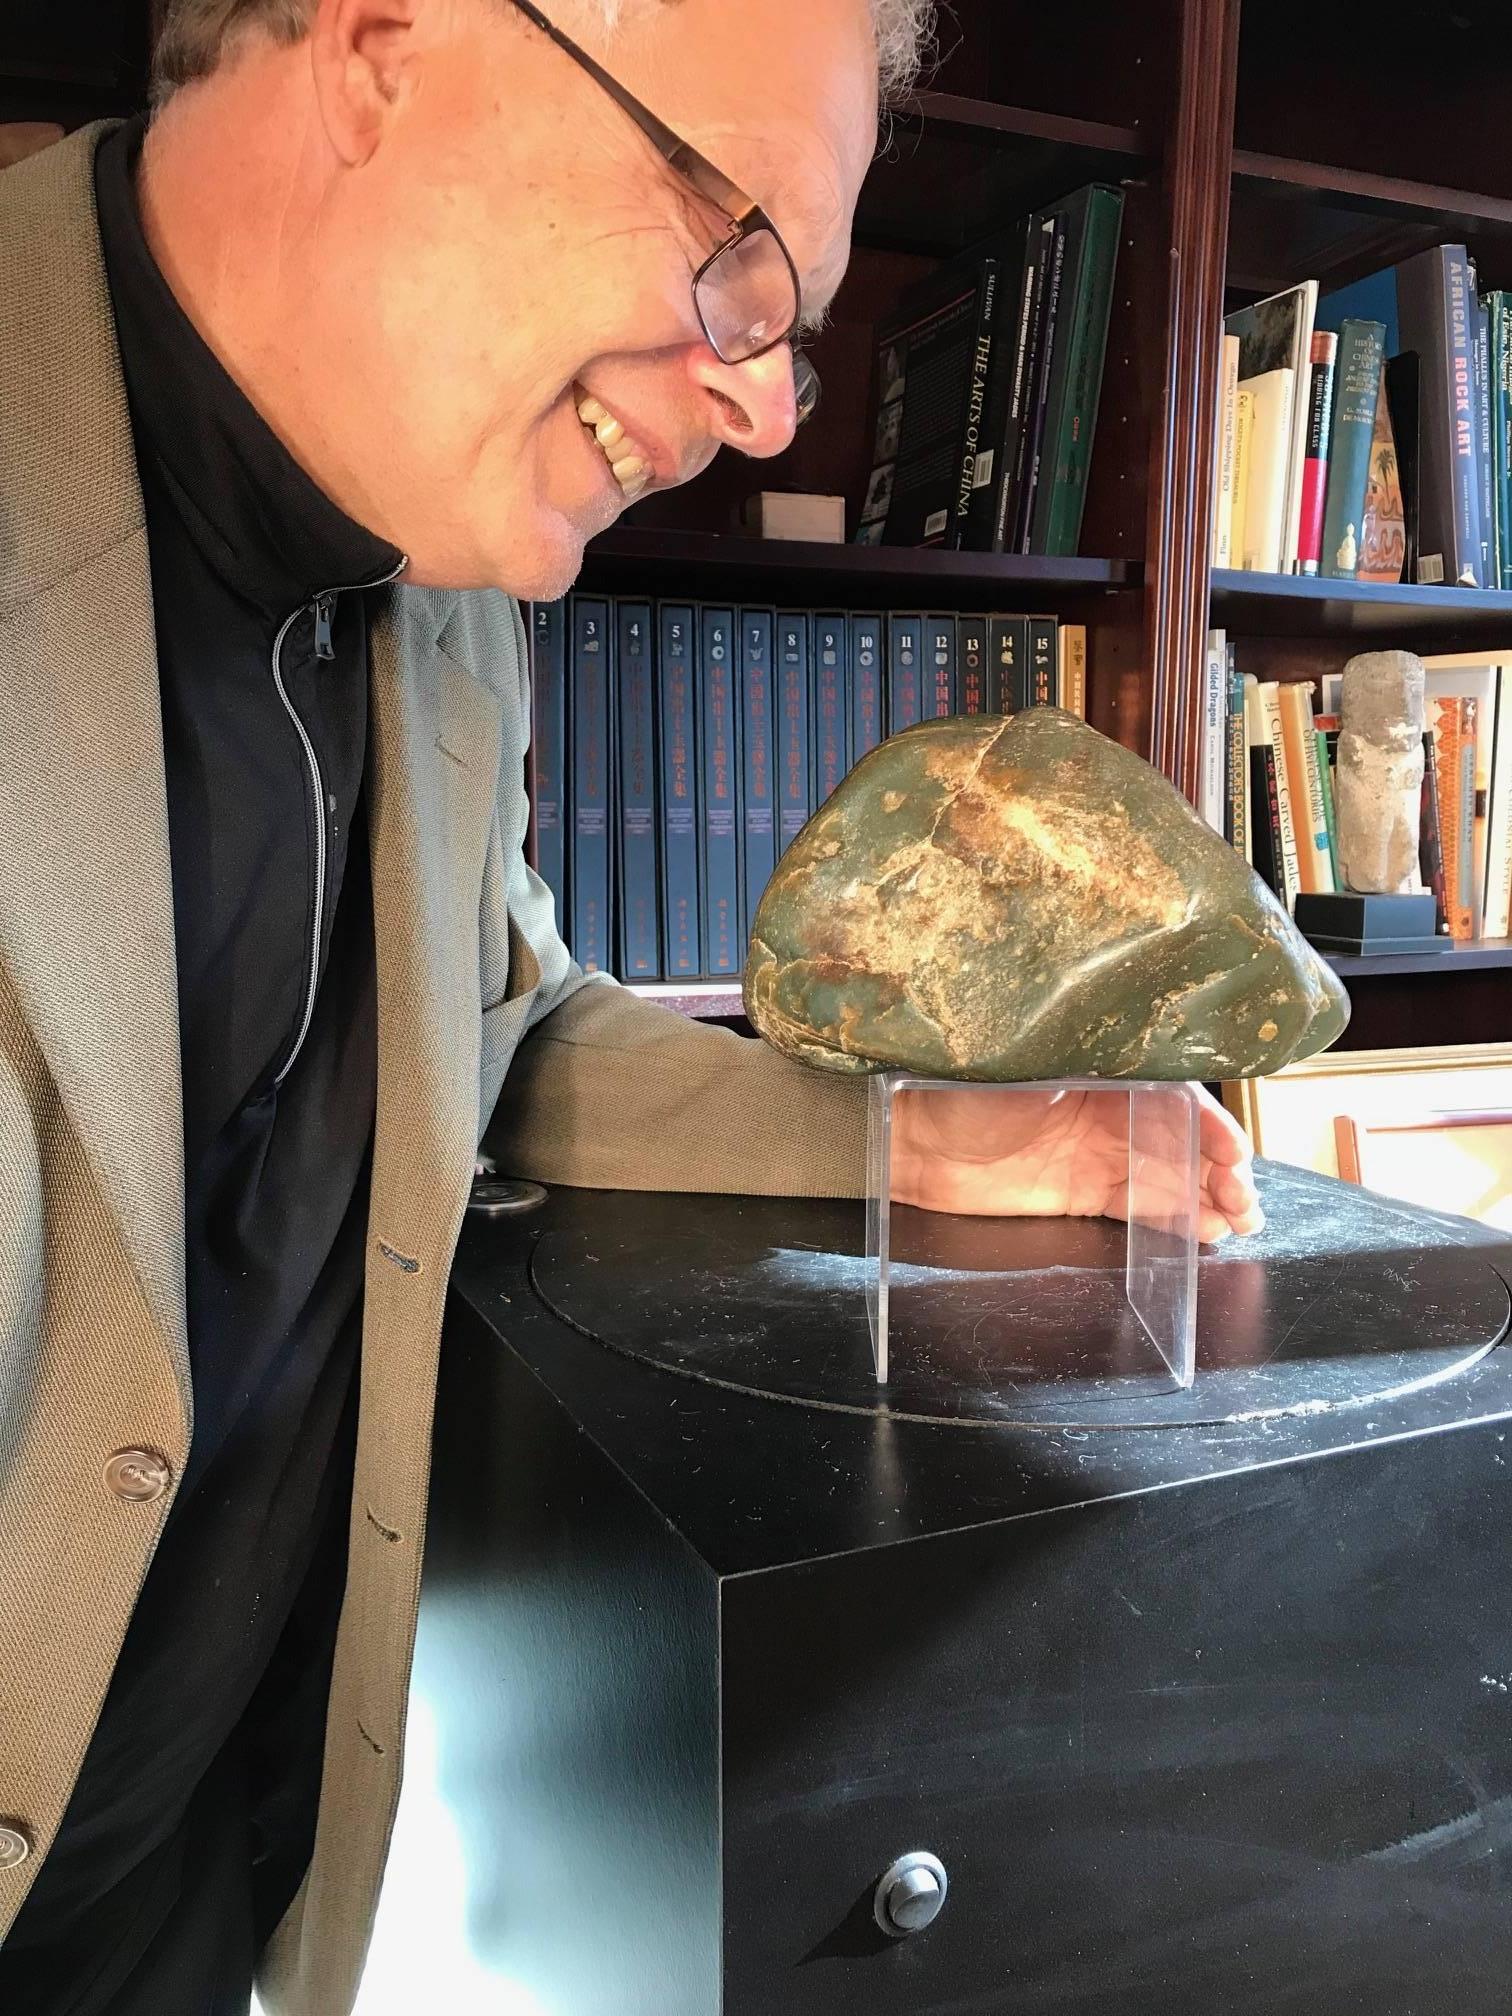 A fine large natural Hetien jade scholar rock in boulder form collected from the Khotan region of western China in 1995.

Weighs in at 14.1 pounds.

Beautiful color and quality.

A complimentary black hardwood display base is included.

Dimensions: